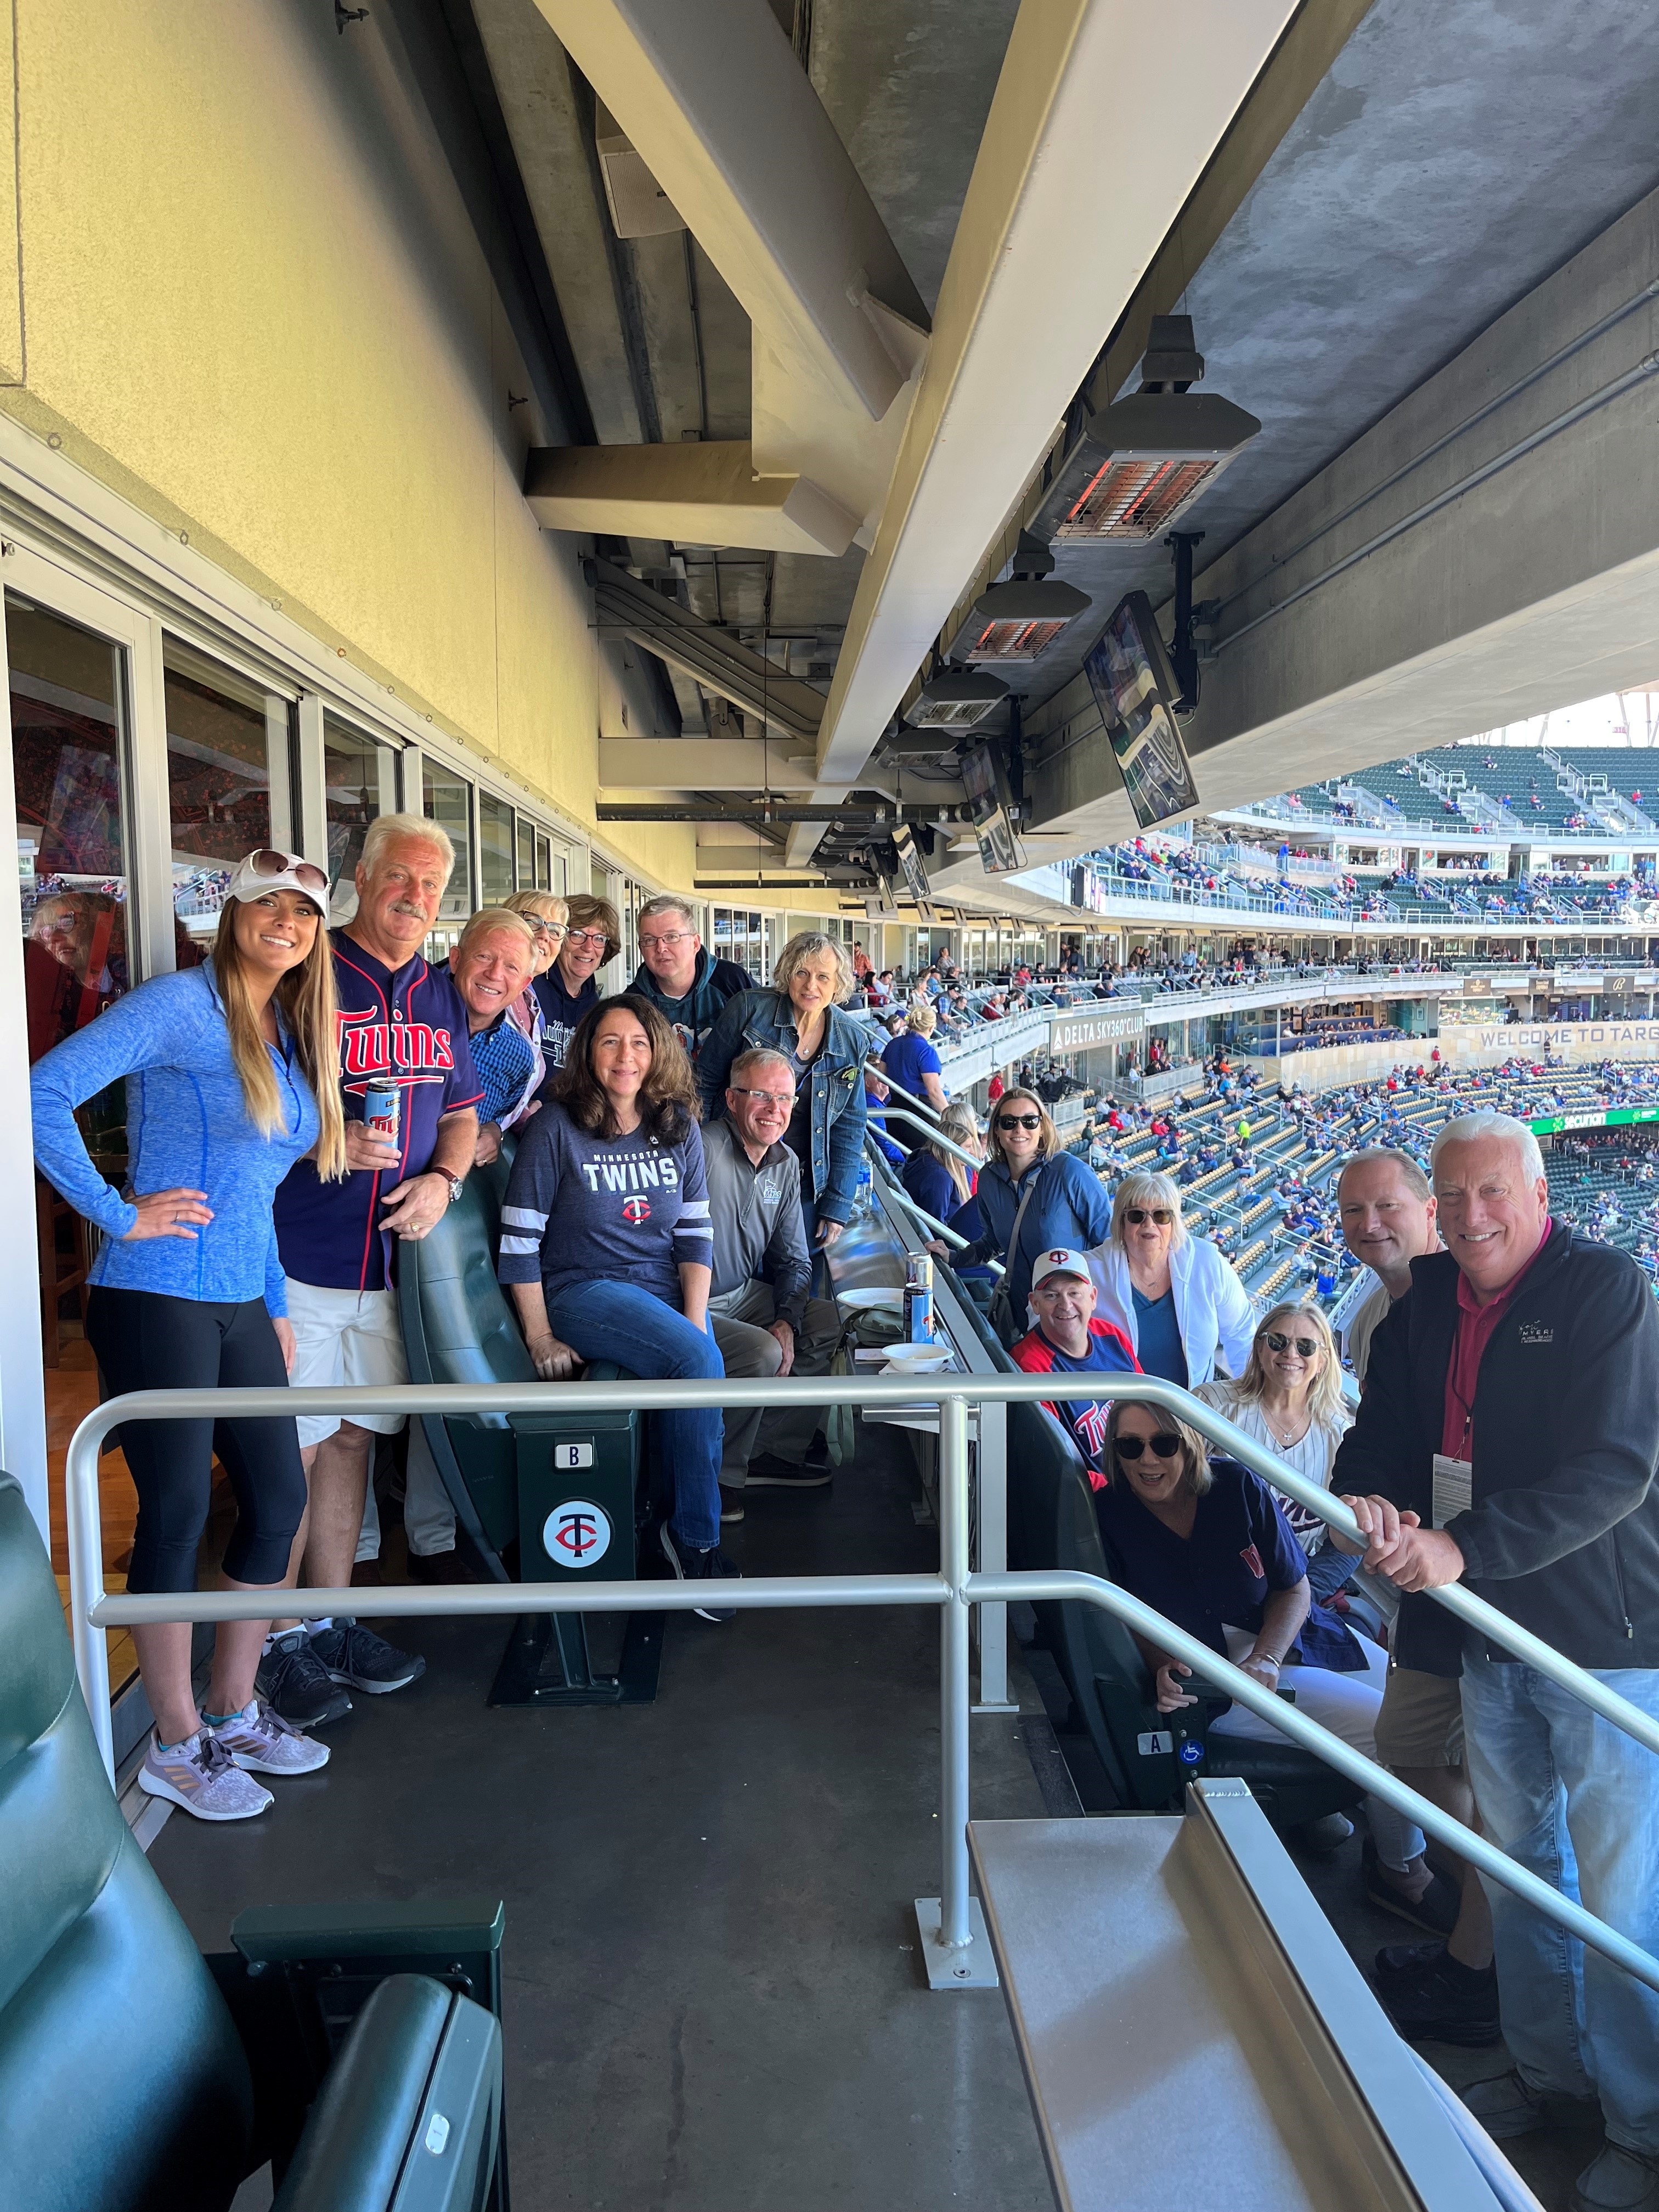 Wonderful networking experience at Target Field in Minneapolis with Jerry Terp